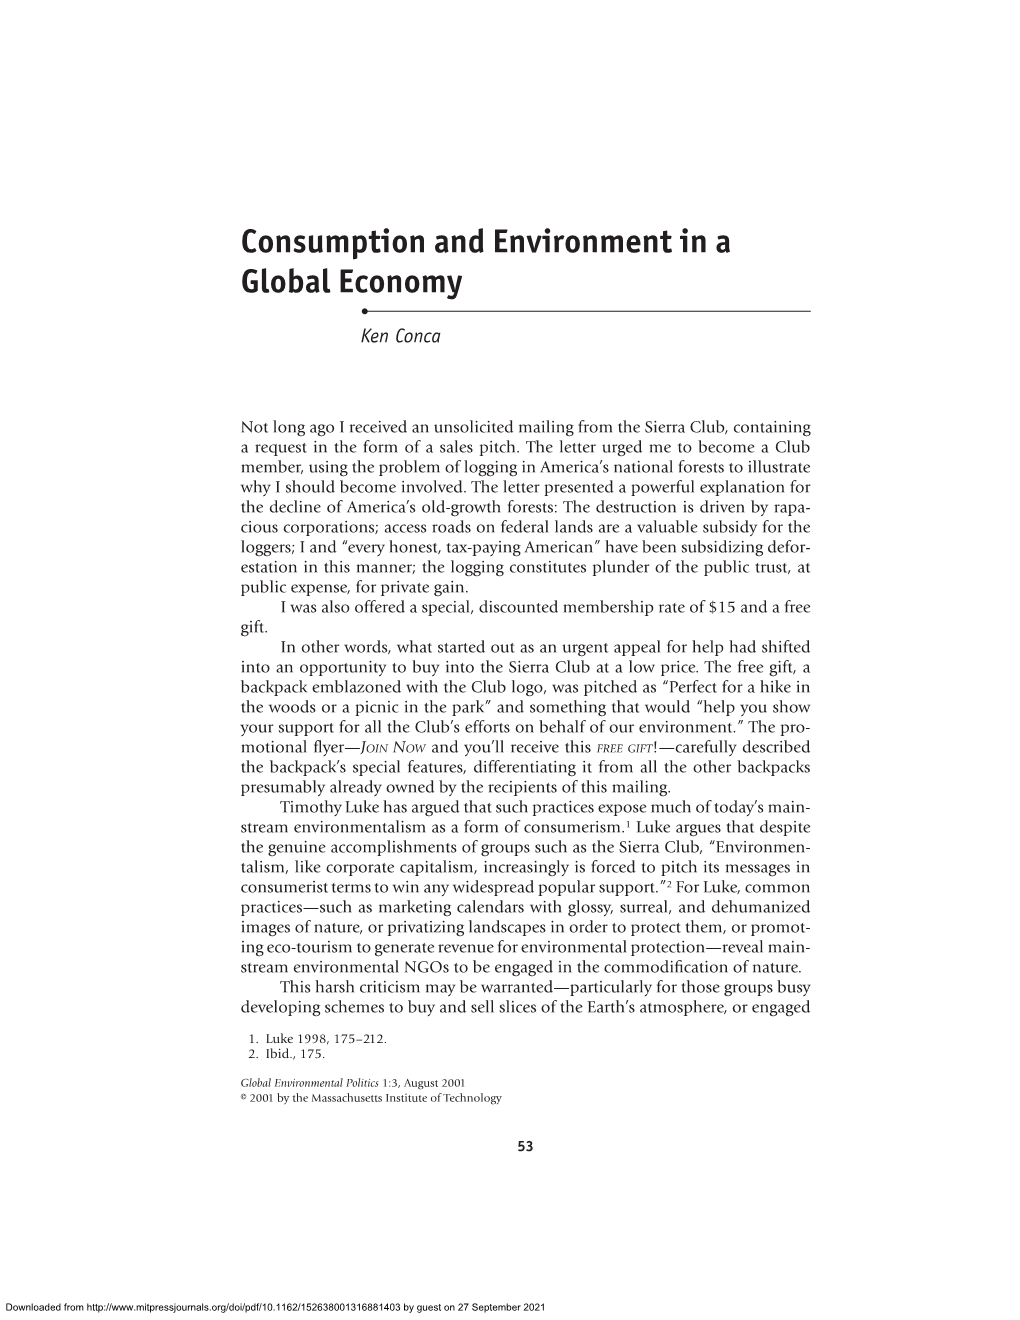 Consumption and Environment in a Global Economy • Ken Conca